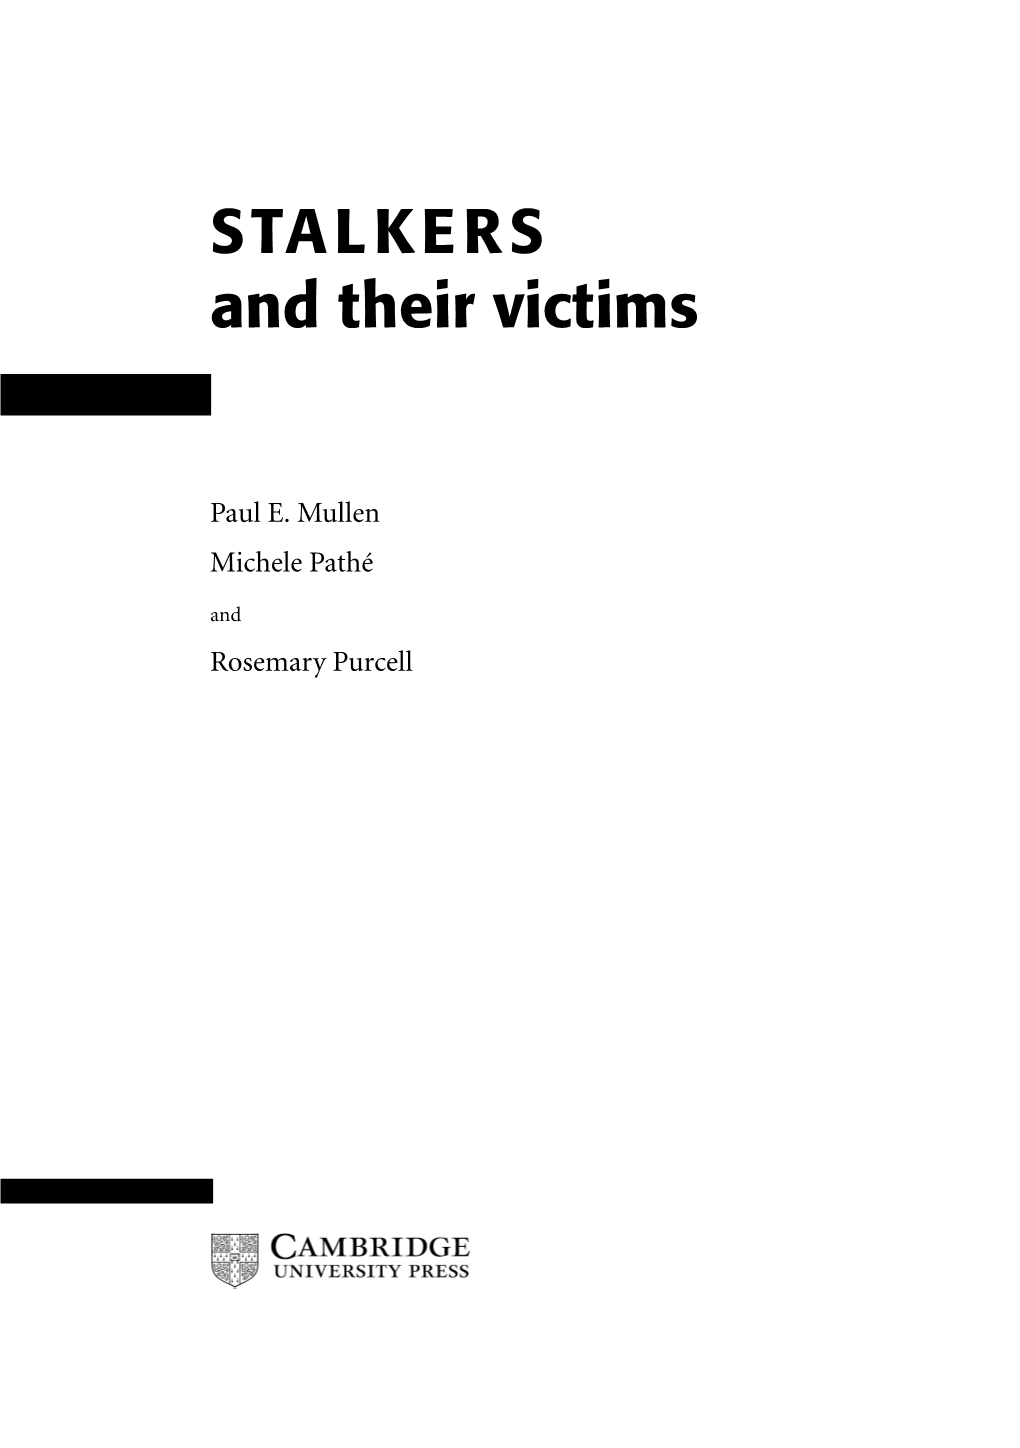 STALKERS and Their Victims